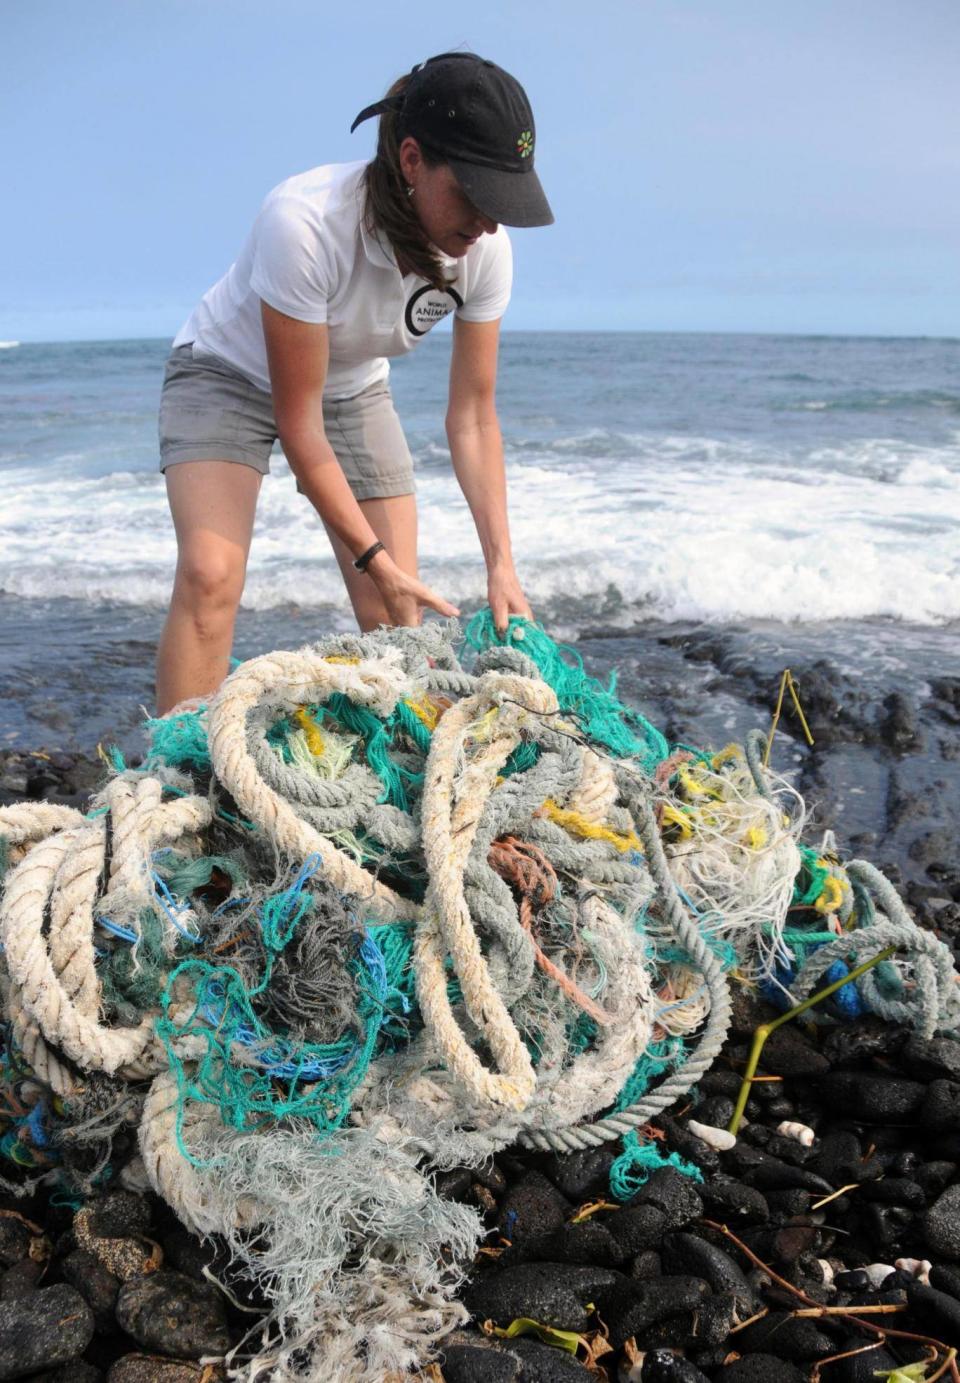 Rope washed up in a hurricane in Hawaii (World Animal Protection / Rachel Ceretto)